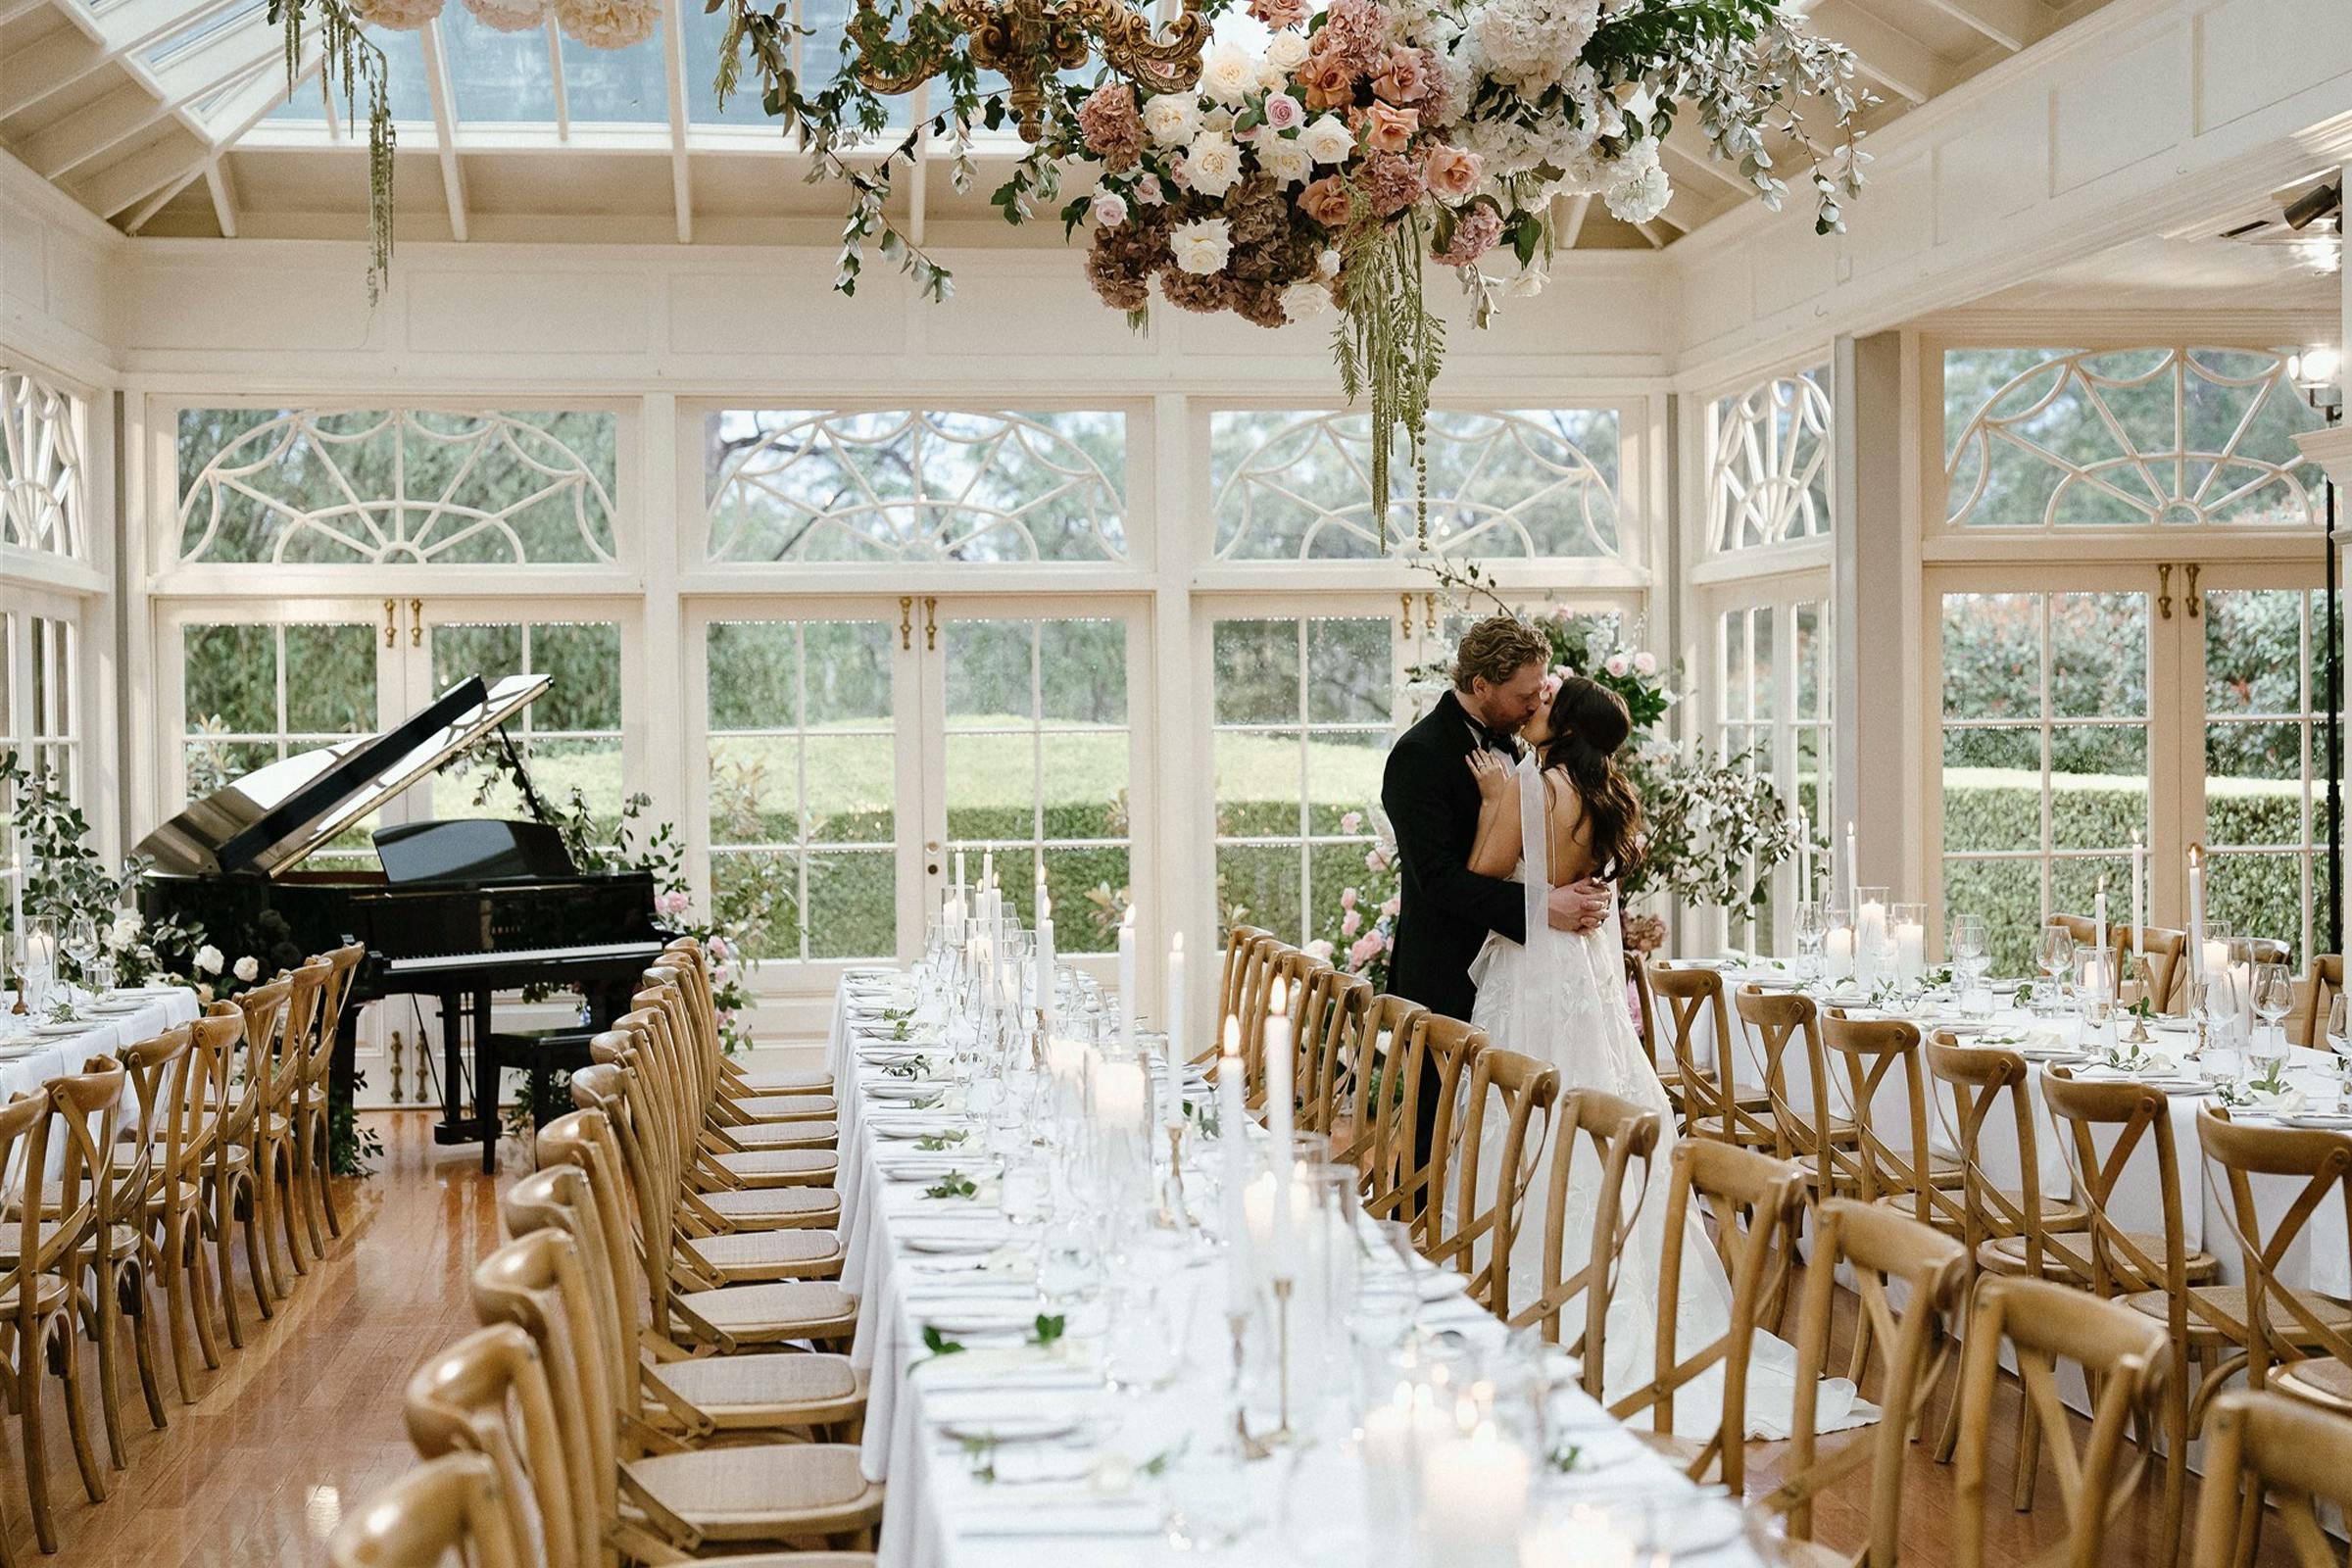 A couple in wedding attire share a kiss in an elegant, bright reception hall. The room is decorated with a hanging floral arrangement and long dining tables set for guests. Large windows overlook a lush garden, and a grand piano is positioned in one corner.